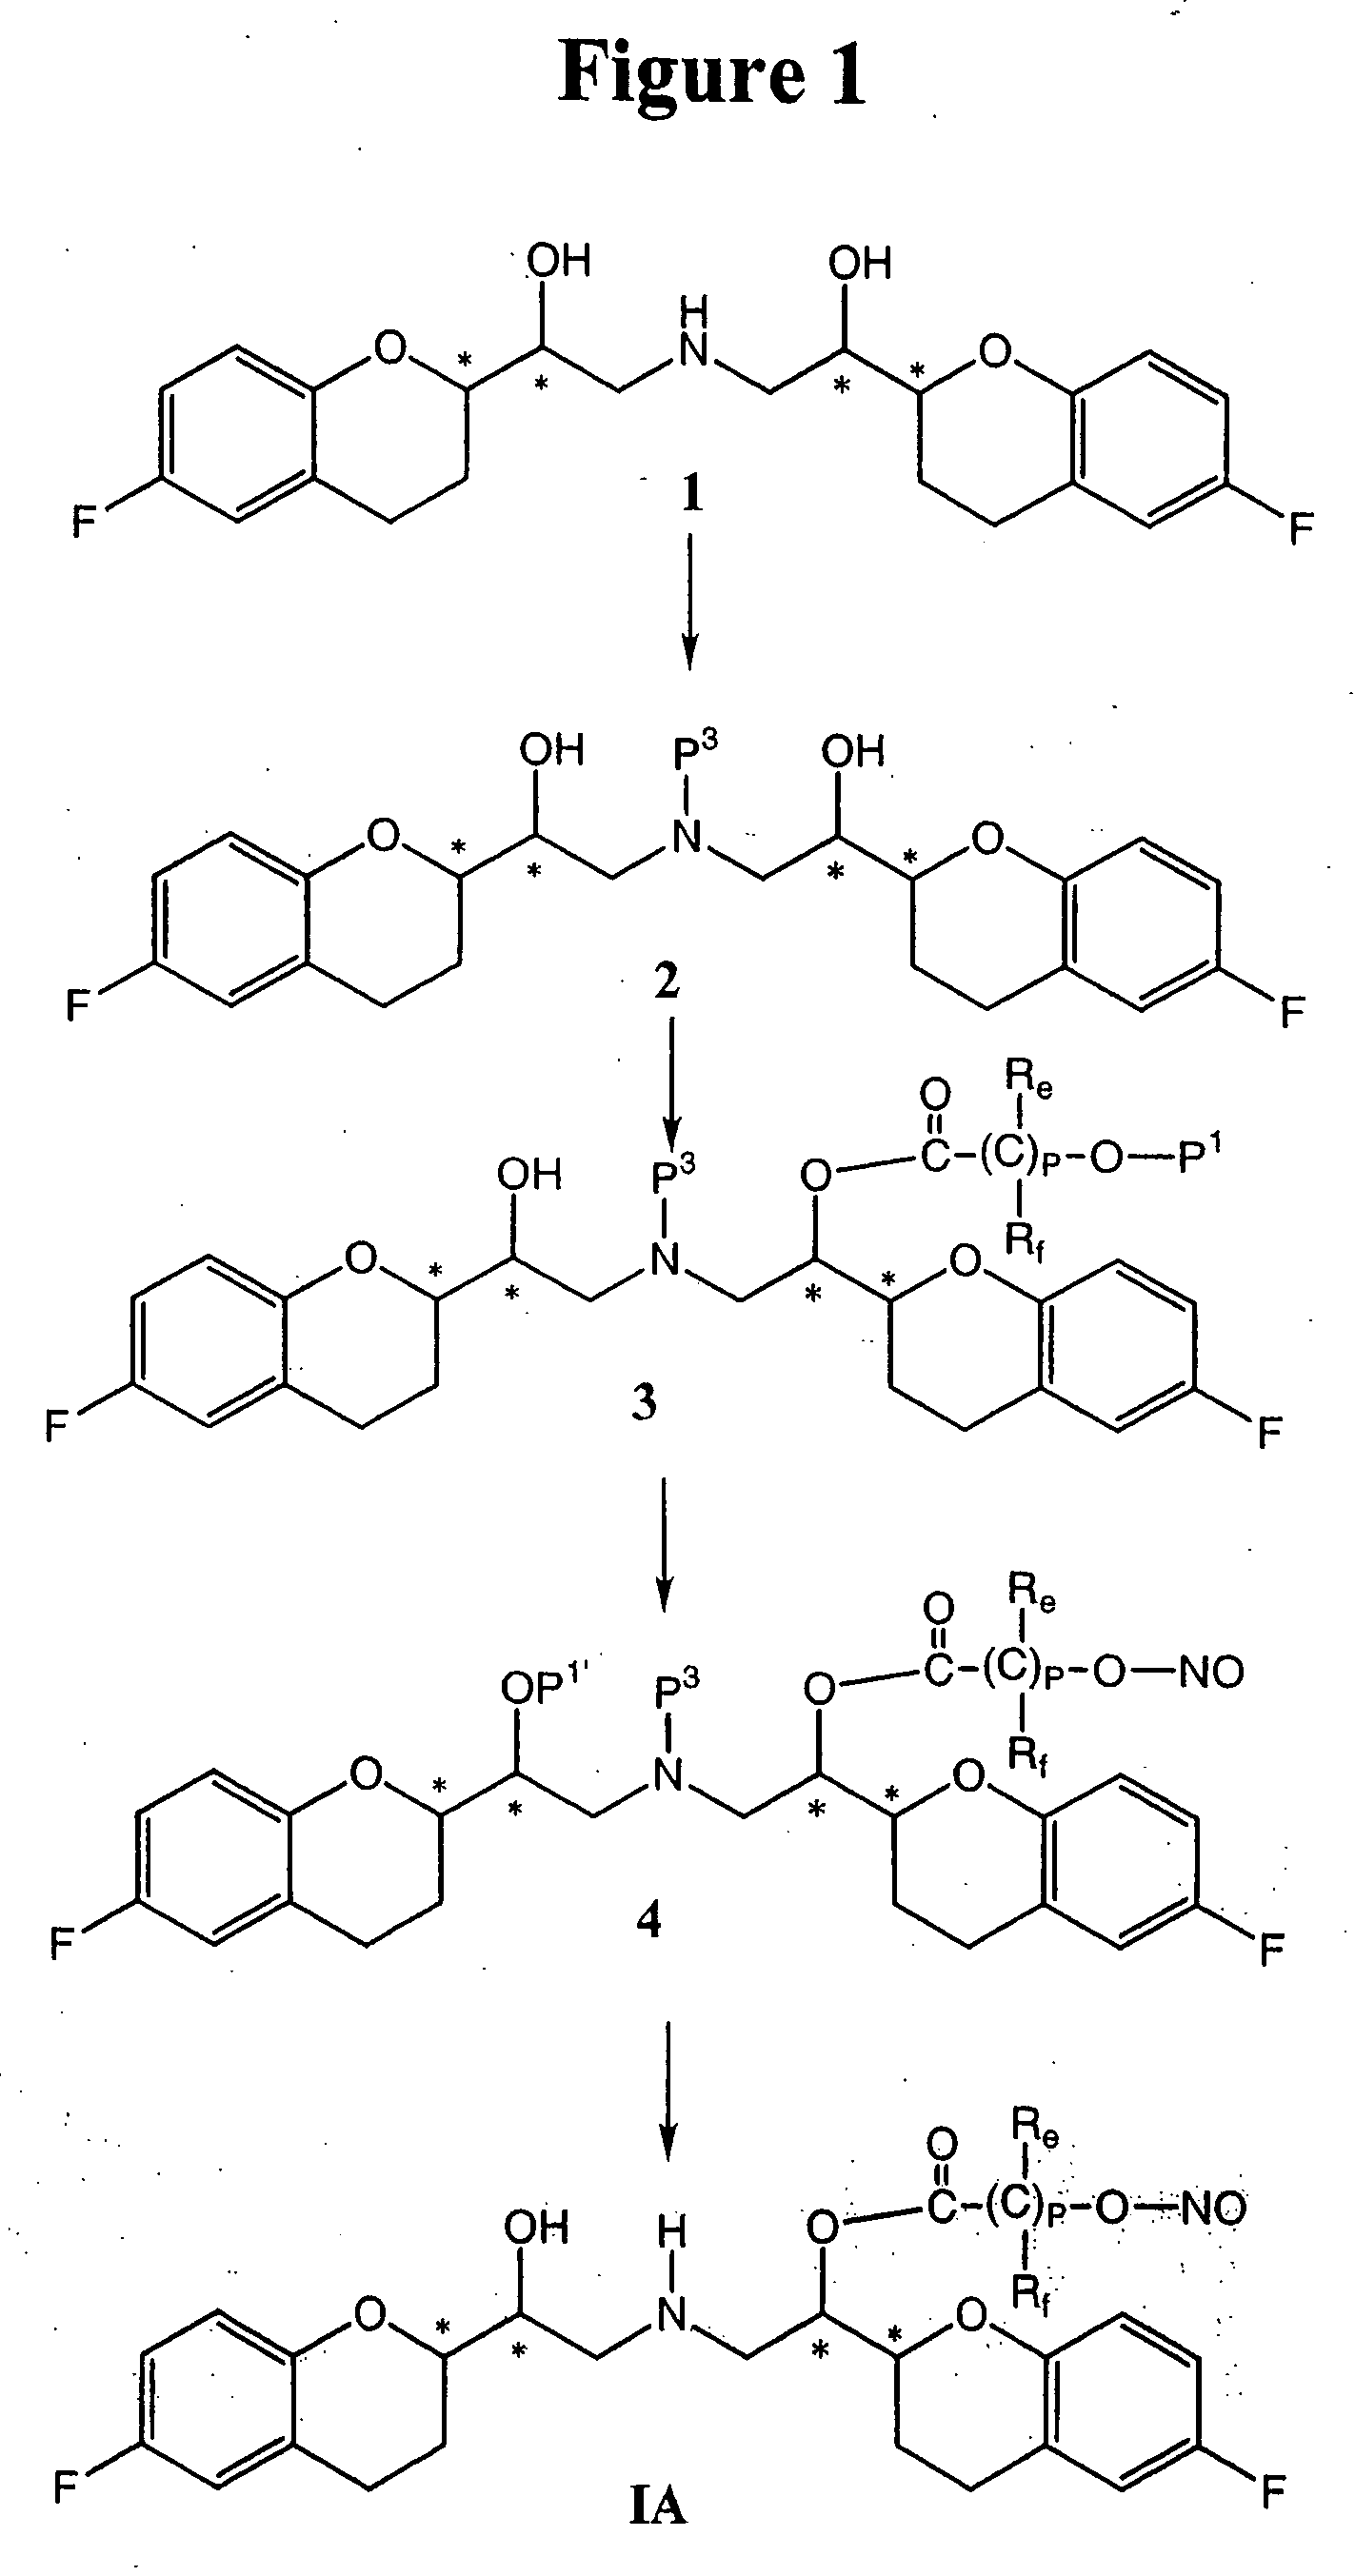 Nebivolol and its metabolites in combination with nitric oxide donors, compositions and methods of use